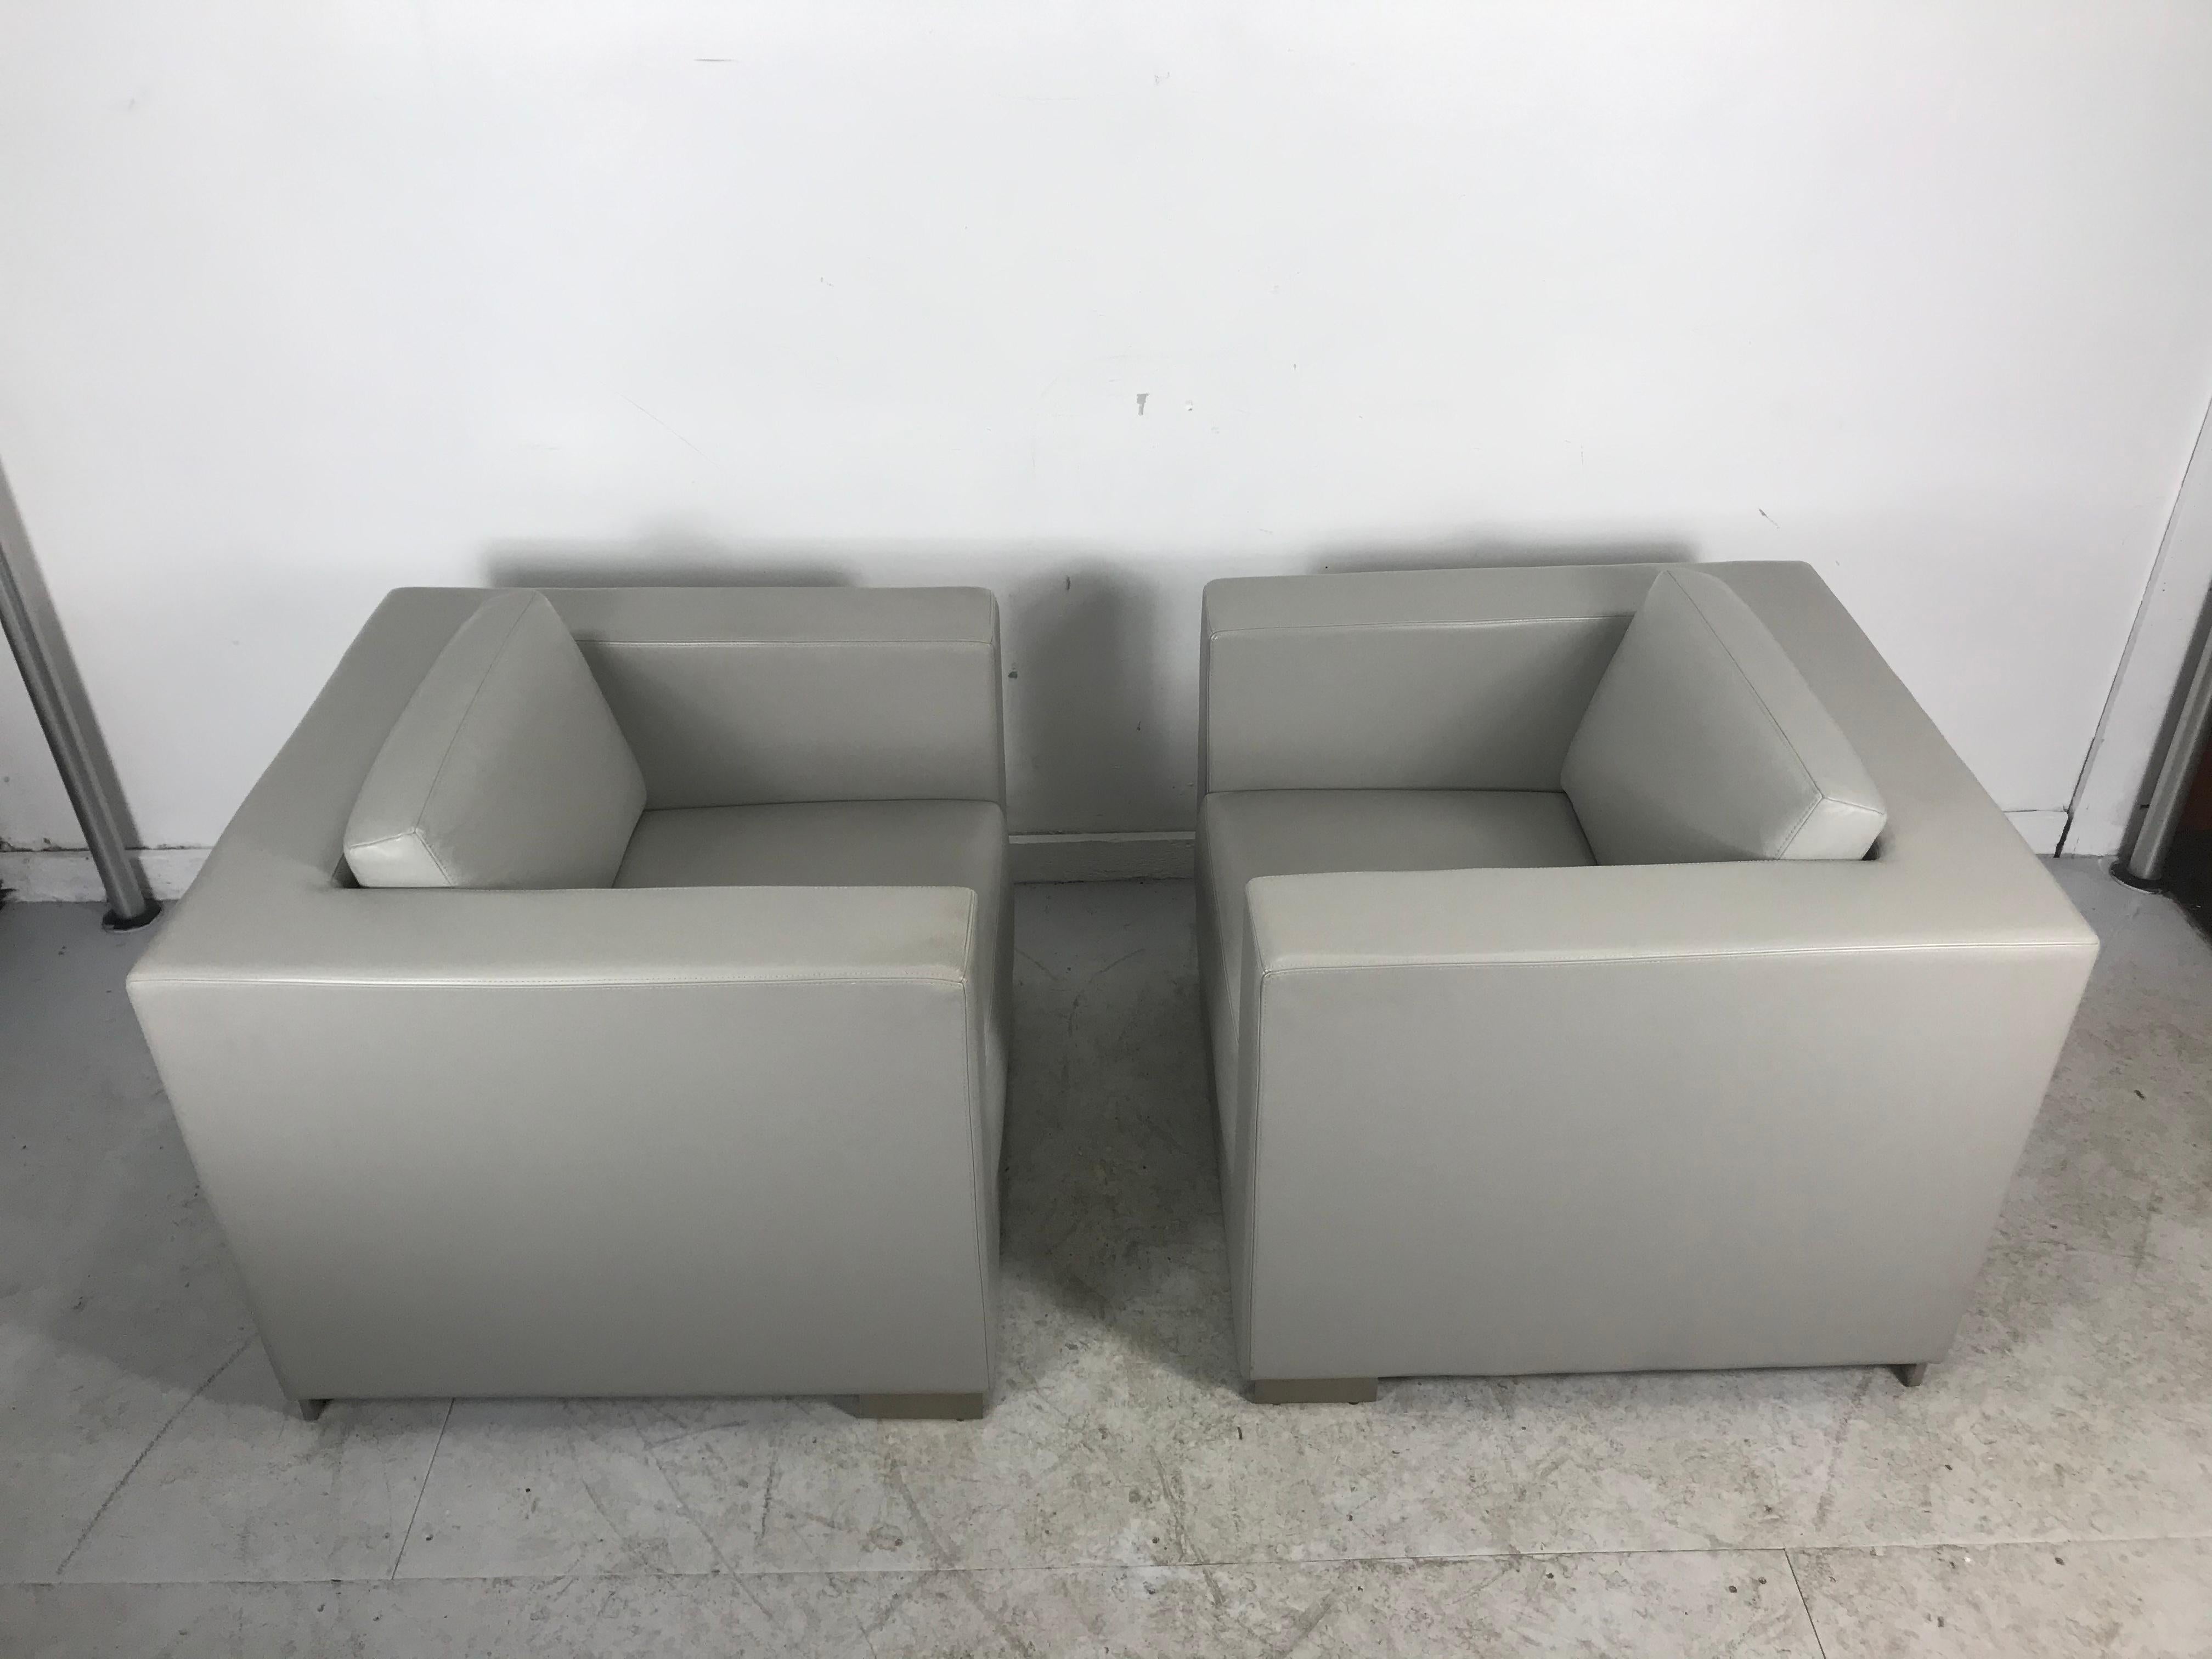 American Stunning Pair of Leather Cube Lounge Chairs by Fabien Baron for Bernhardt Design